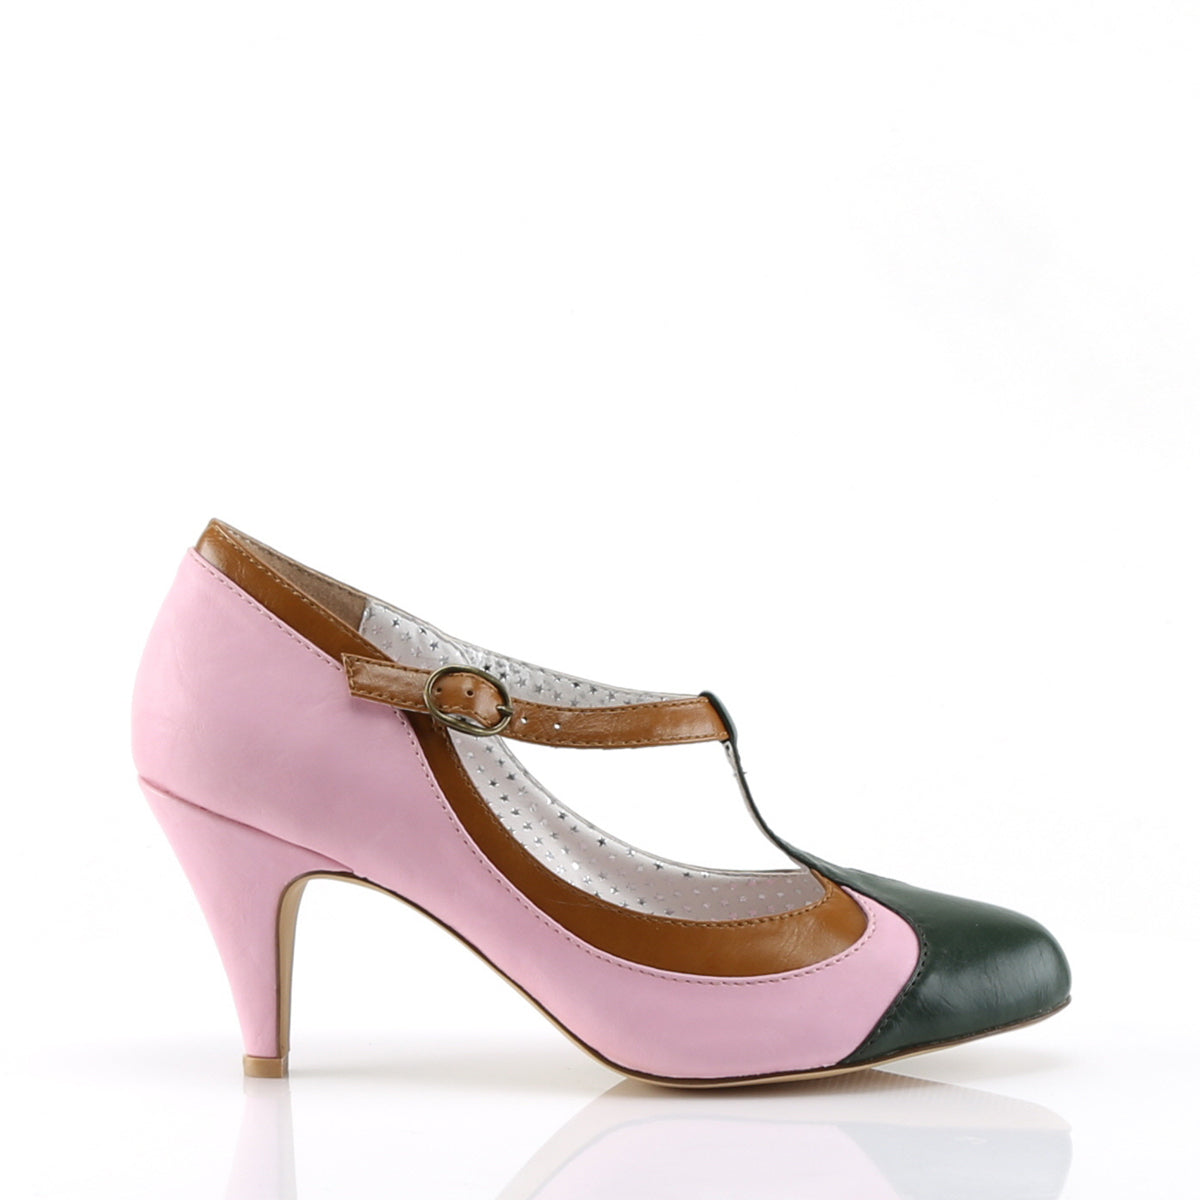 PEACH-03 Pin Up Couture B.Pink Multi Faux Leather Single Soles [Retro Glamour Shoes]